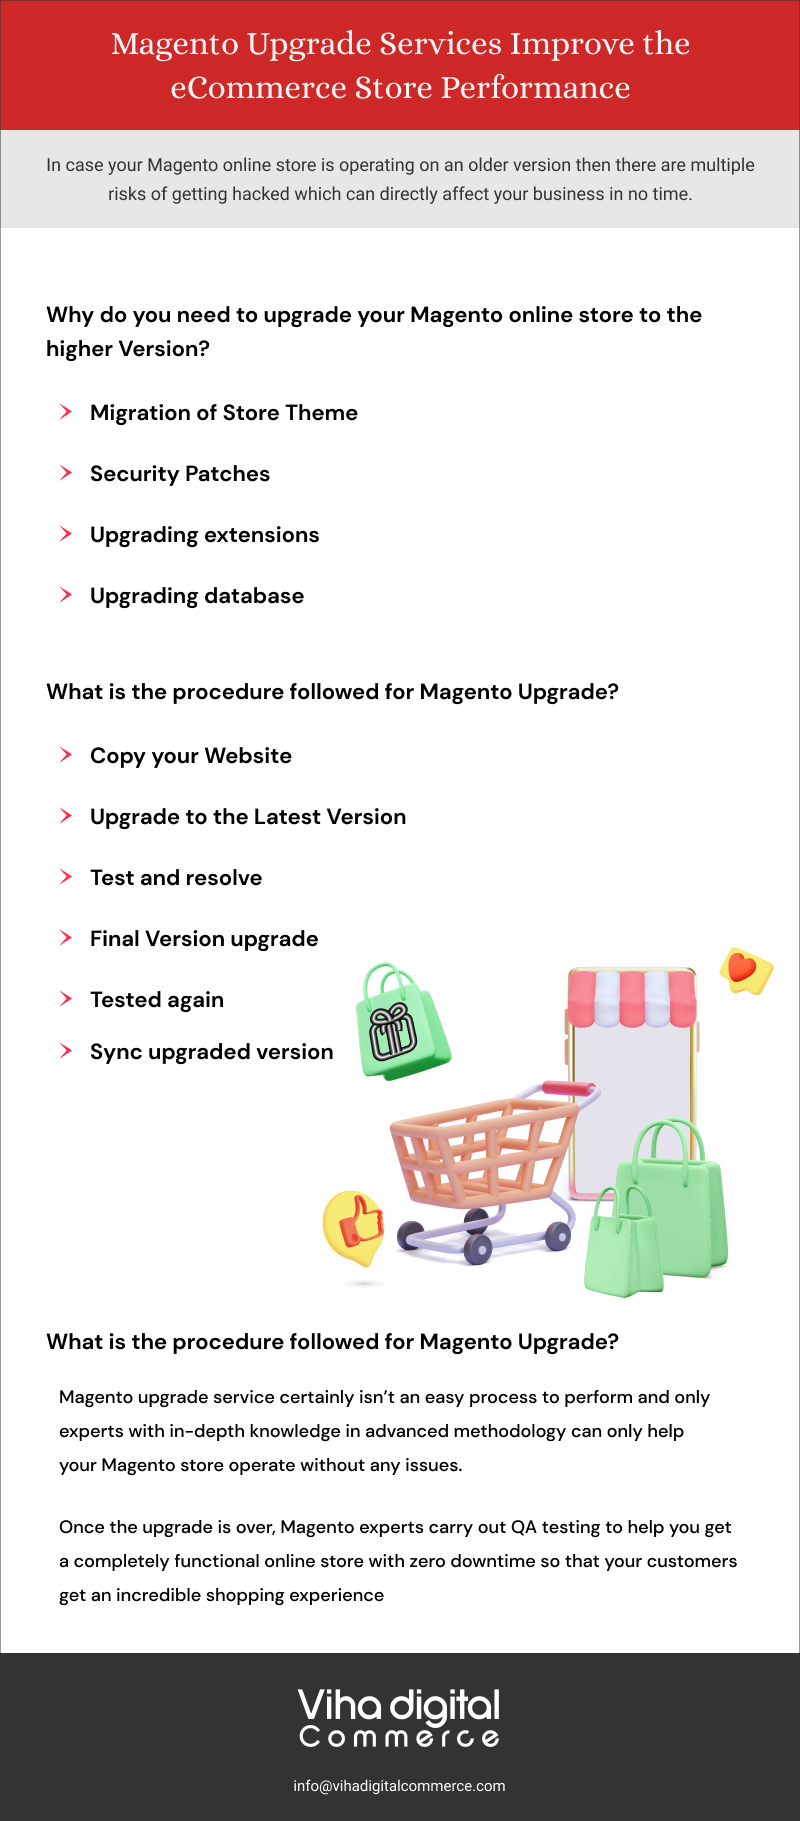 Magento Upgrade Services Improve the eCommerce Store Performance